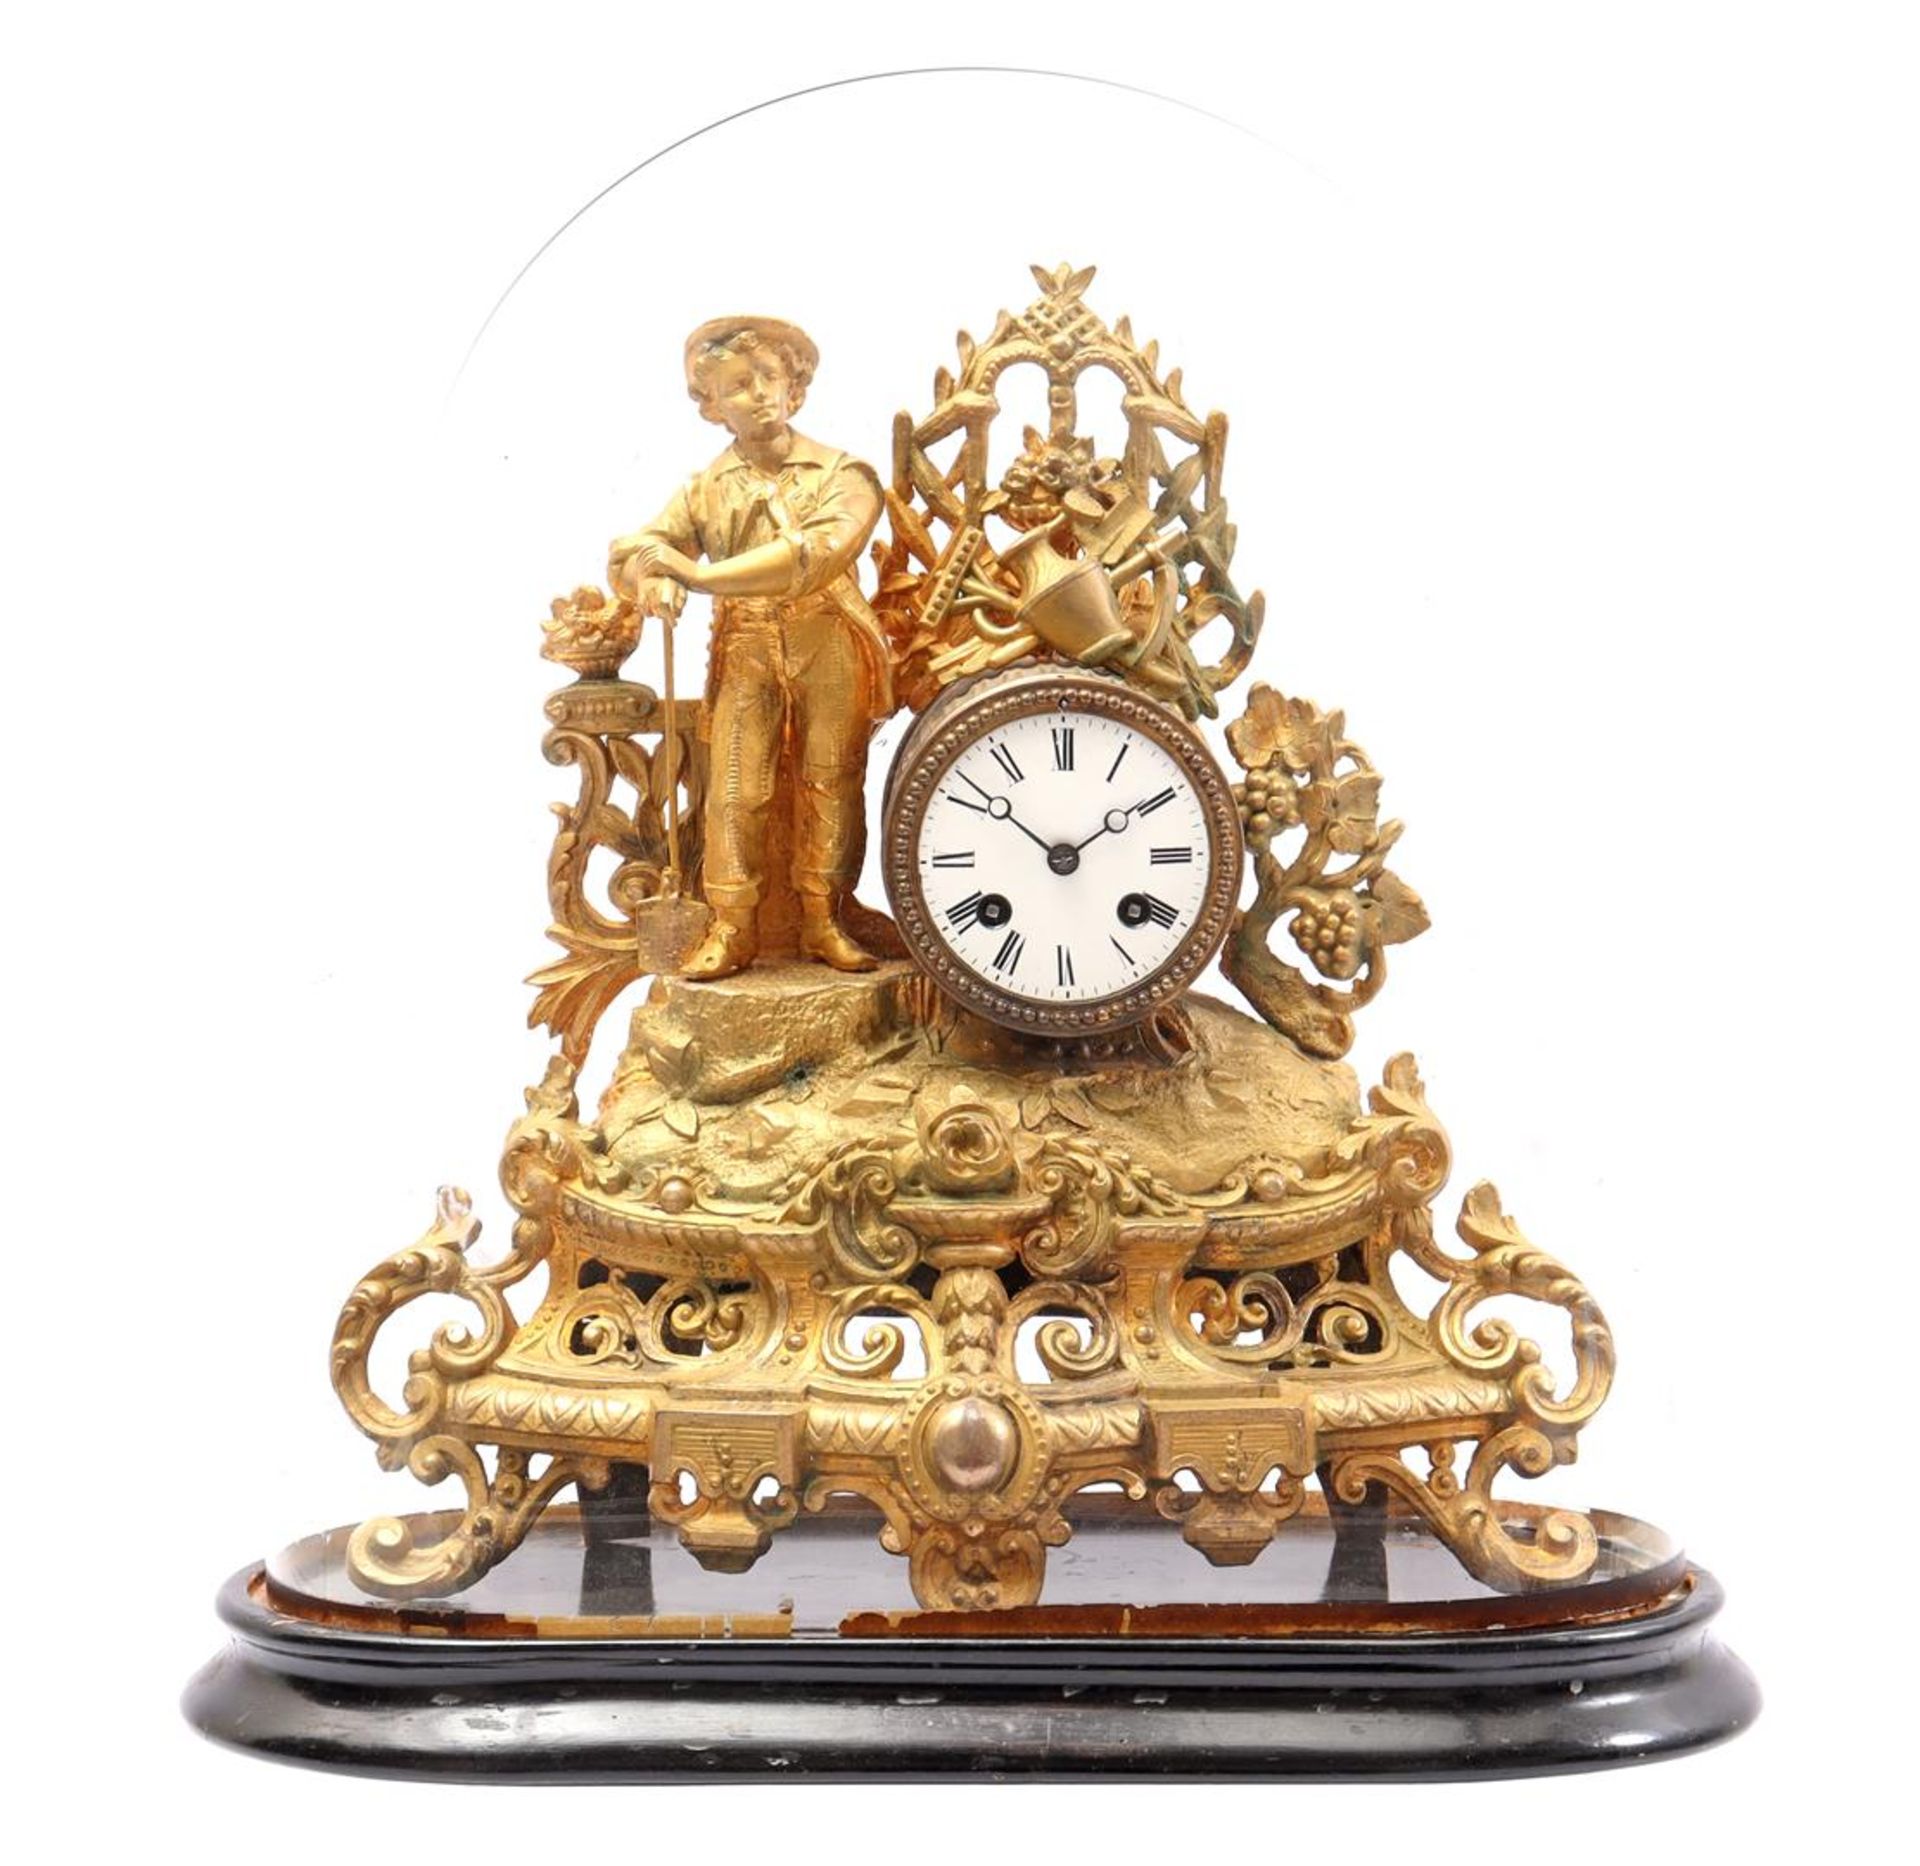 French zinc alloy mantel clock, marked Japy Freres, ca. 1900